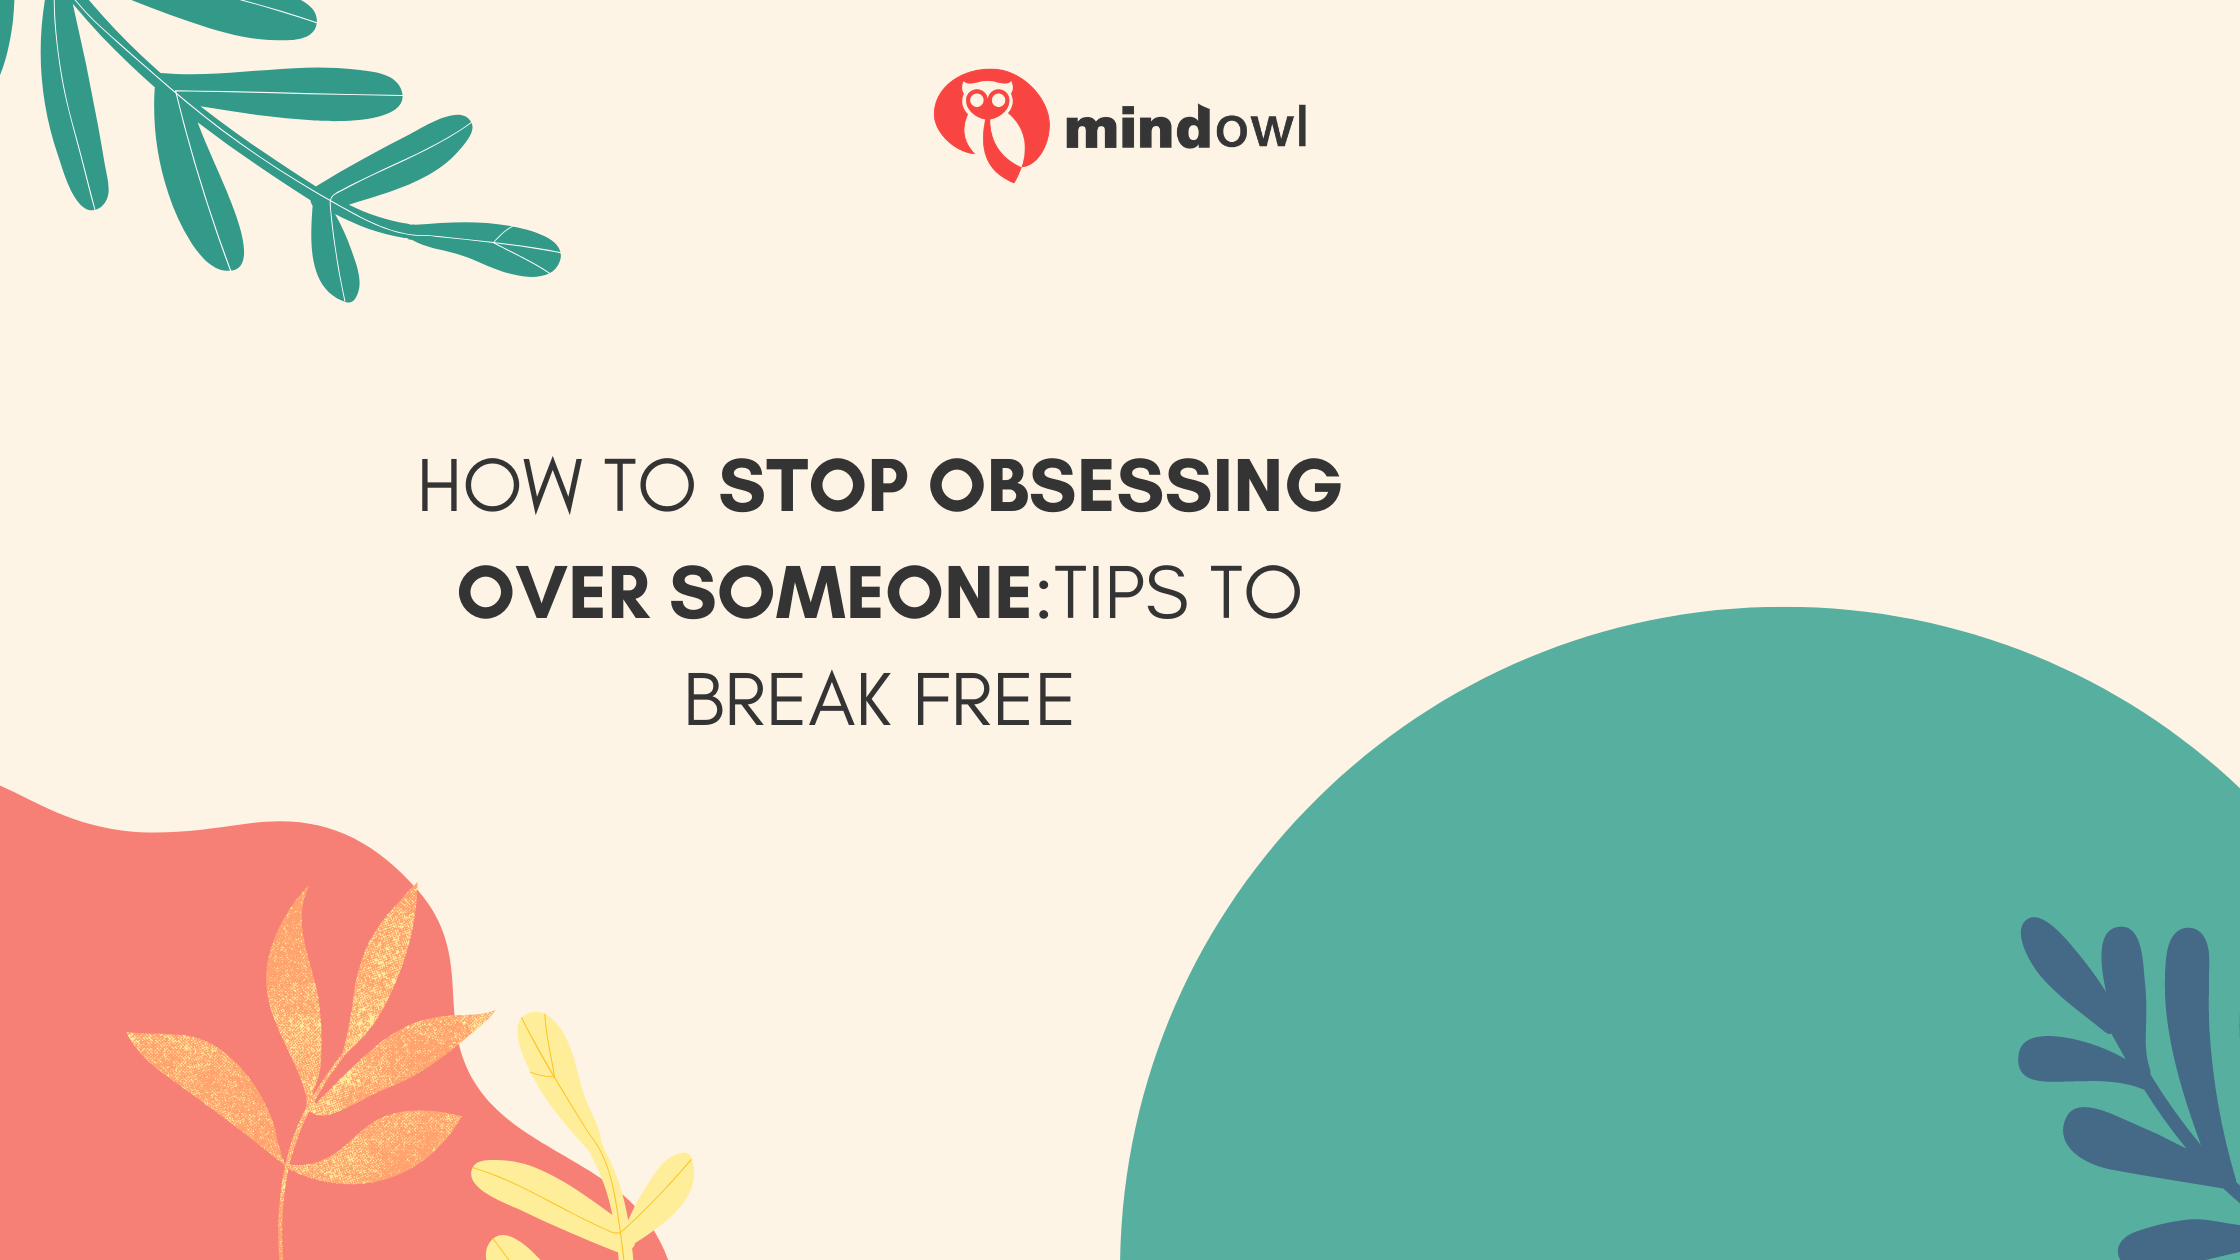 How To Stop Obsessing Over Someone: Tips To Break Free